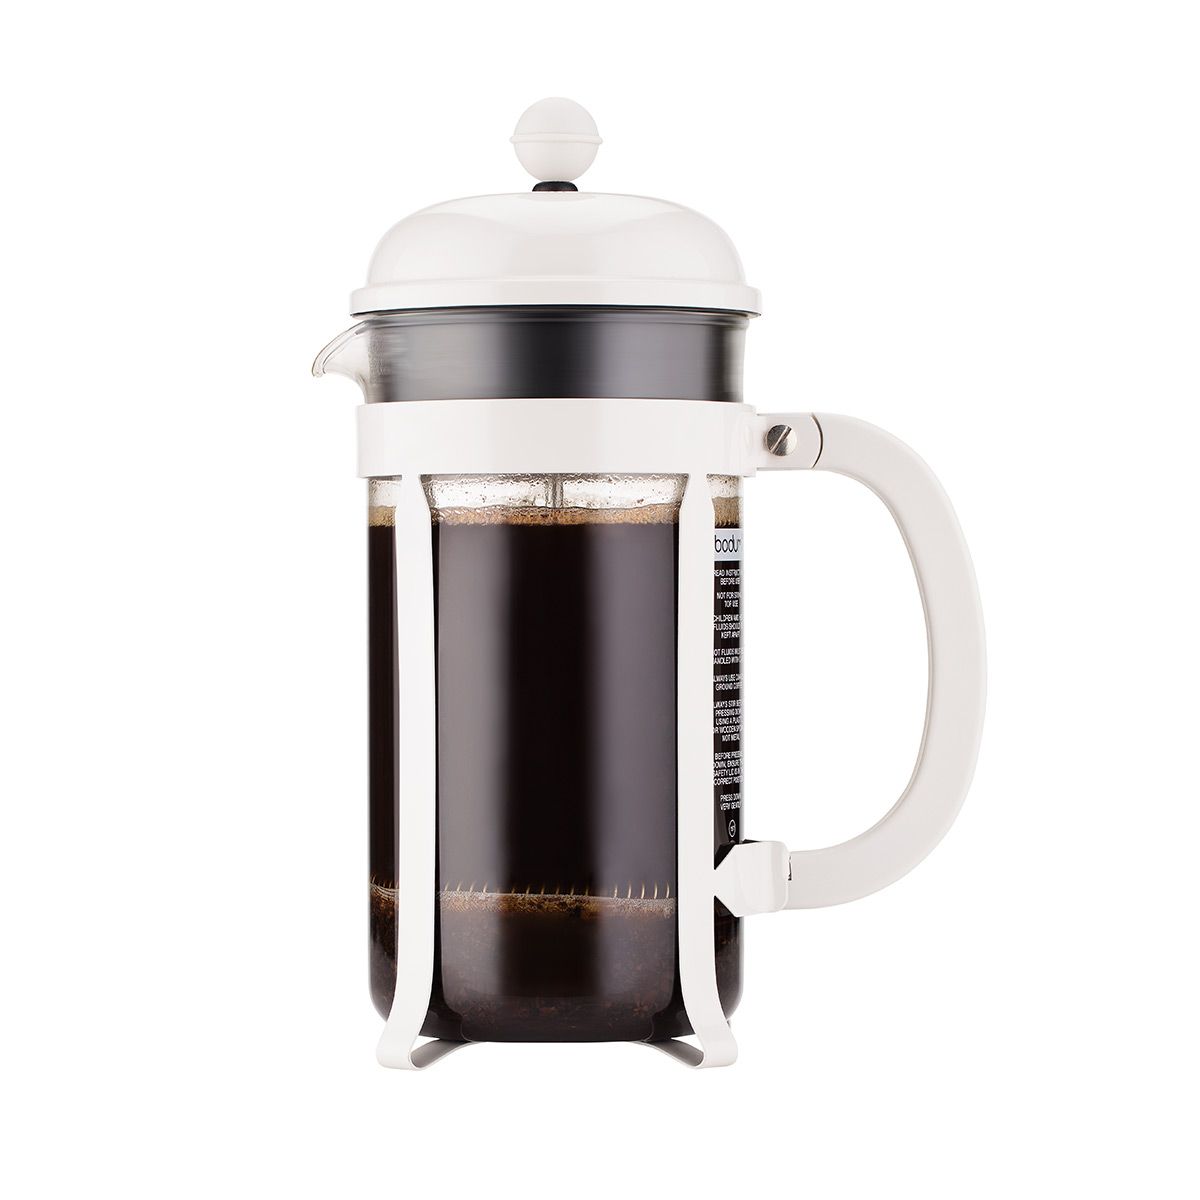 Spare Glass Carafe for Bodum French Press Coffee Maker, 8-Cup 1.0-Liter  34-Ounce 